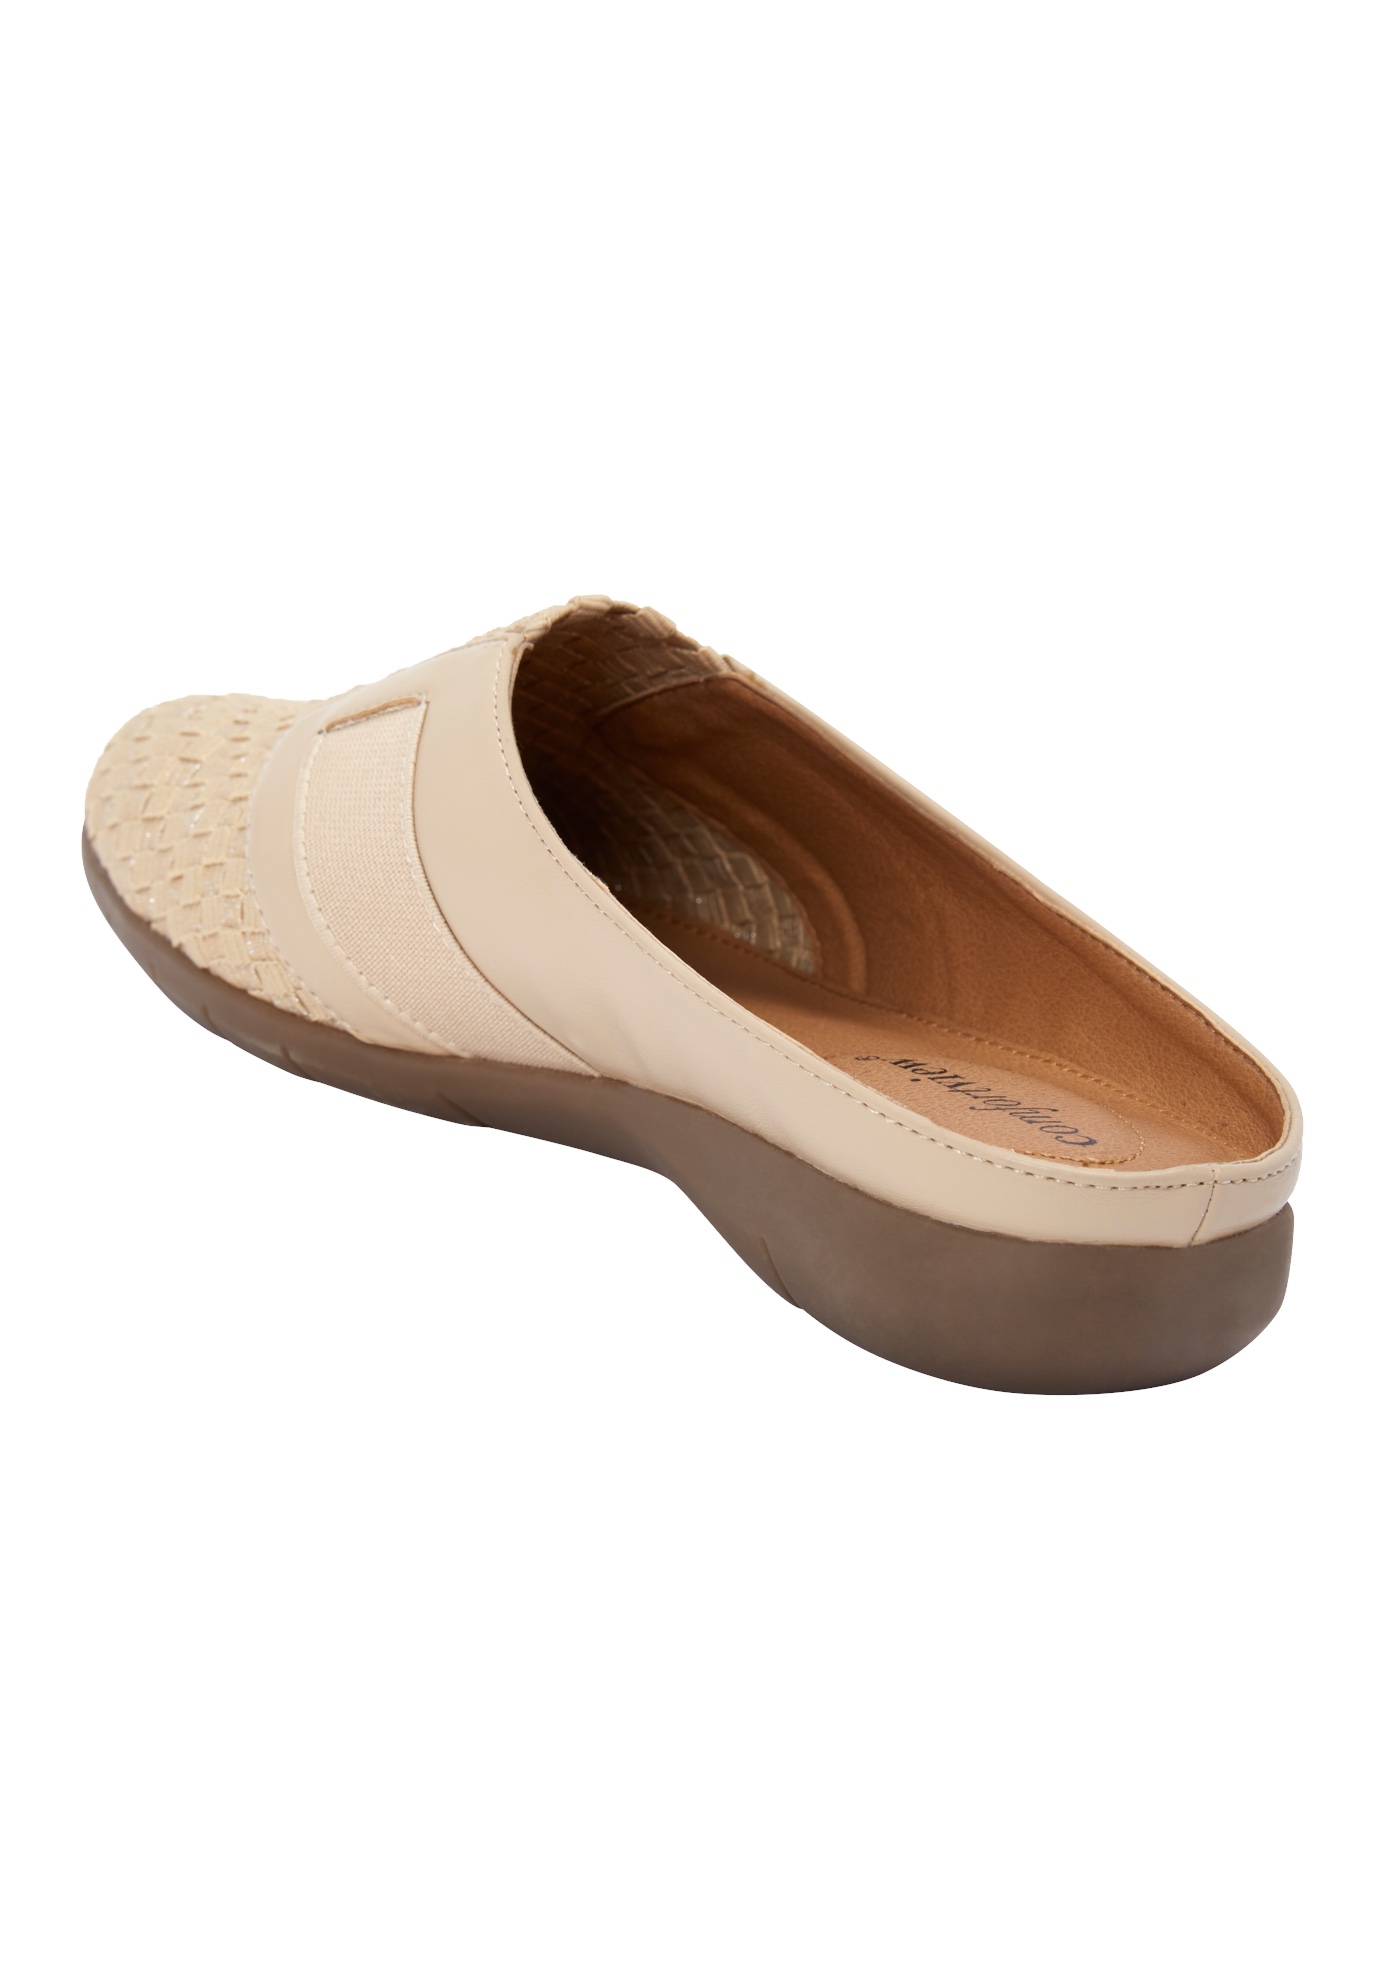 Comfortview Women's Wide Width The Lola Mule Shoes - image 3 of 7